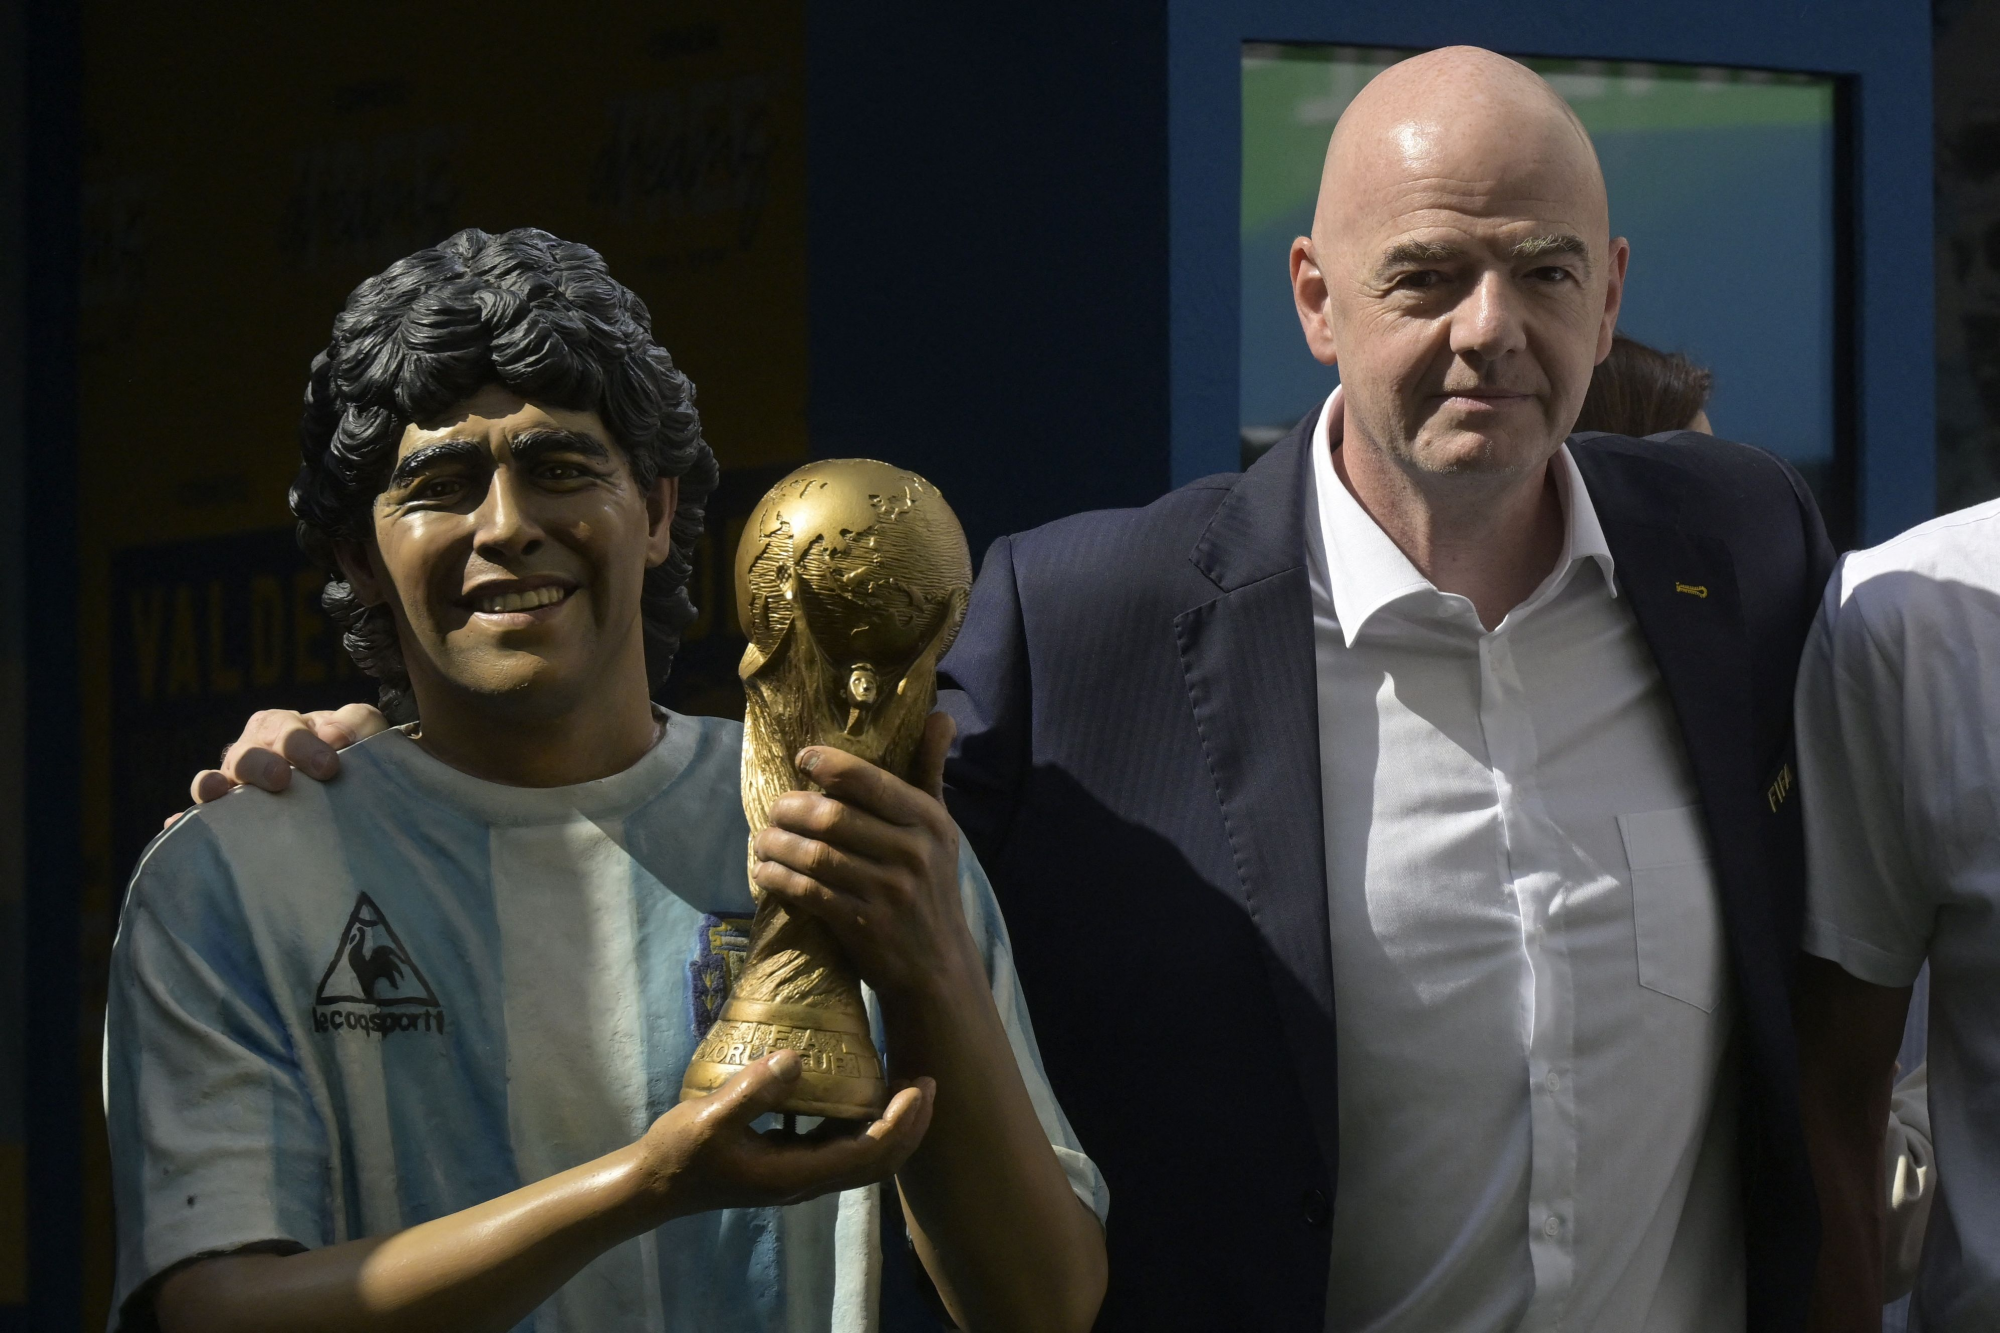 Infantino: "Every World Cup Should Have a Maradona Day"